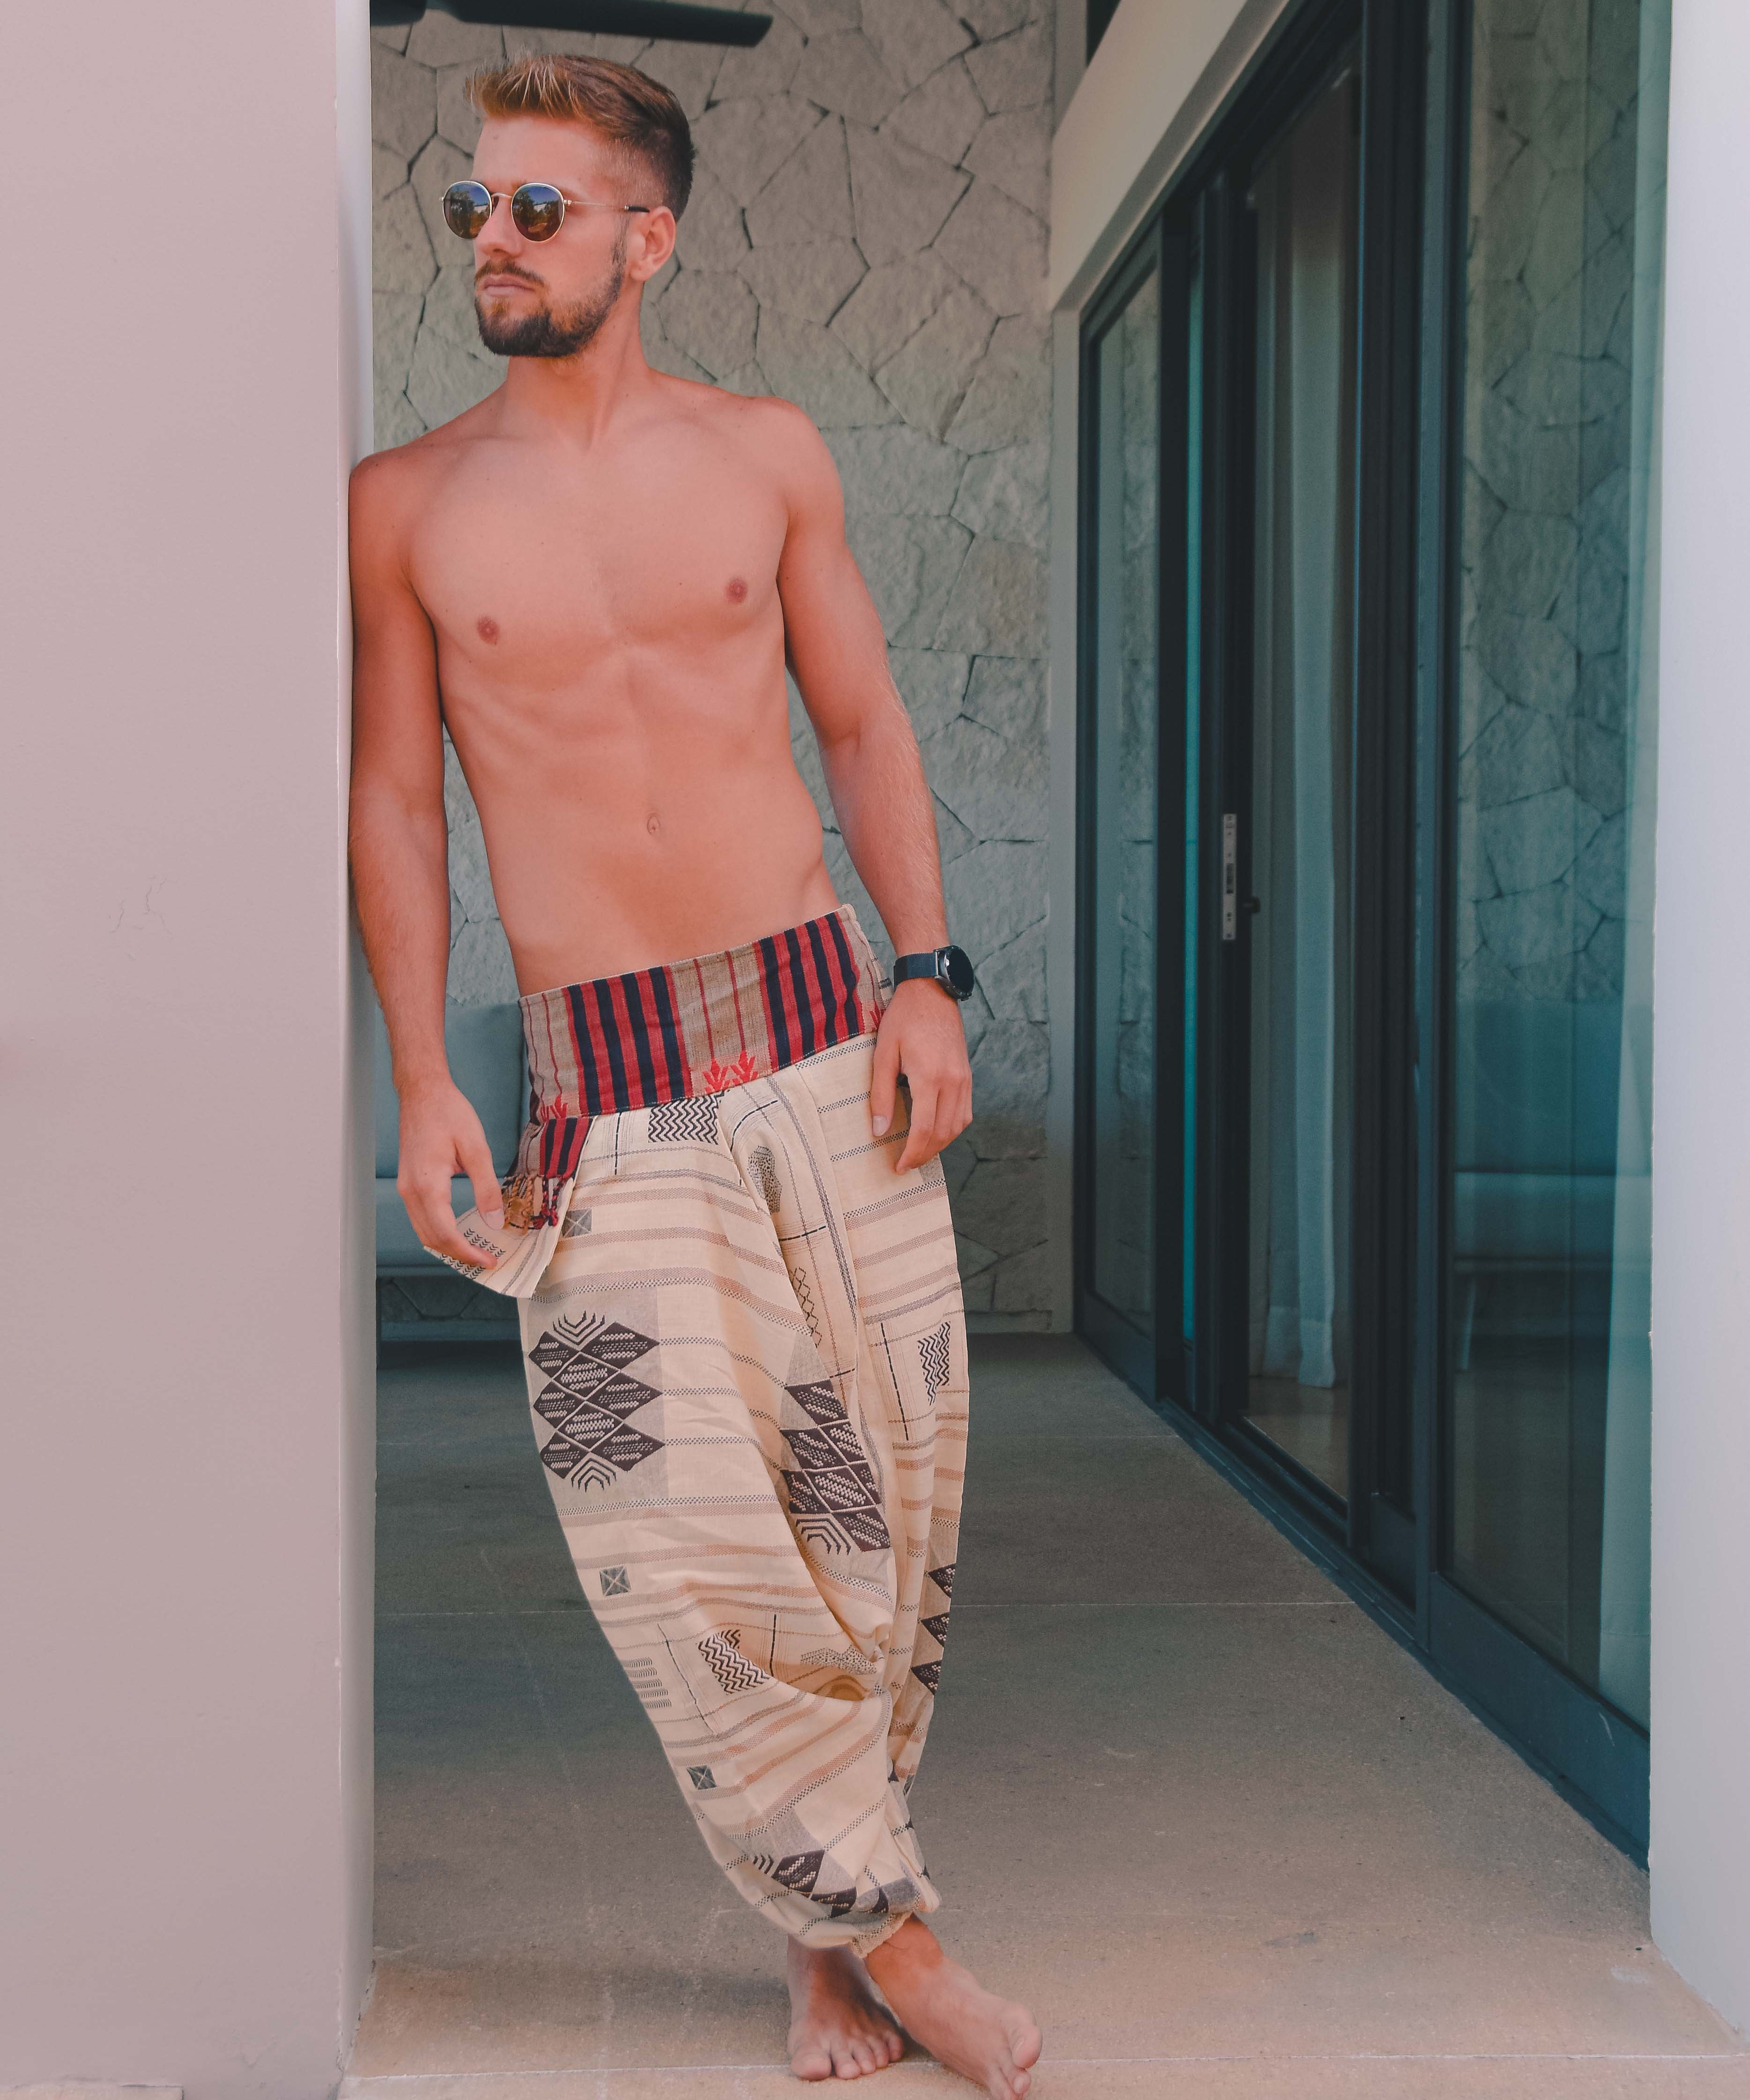 DALAI PANTS Elepanta Unisex Casual Pants - Buy Today Elephant Pants Jewelry And Bohemian Clothes Handmade In Thailand Help To Save The Elephants FairTrade And Vegan